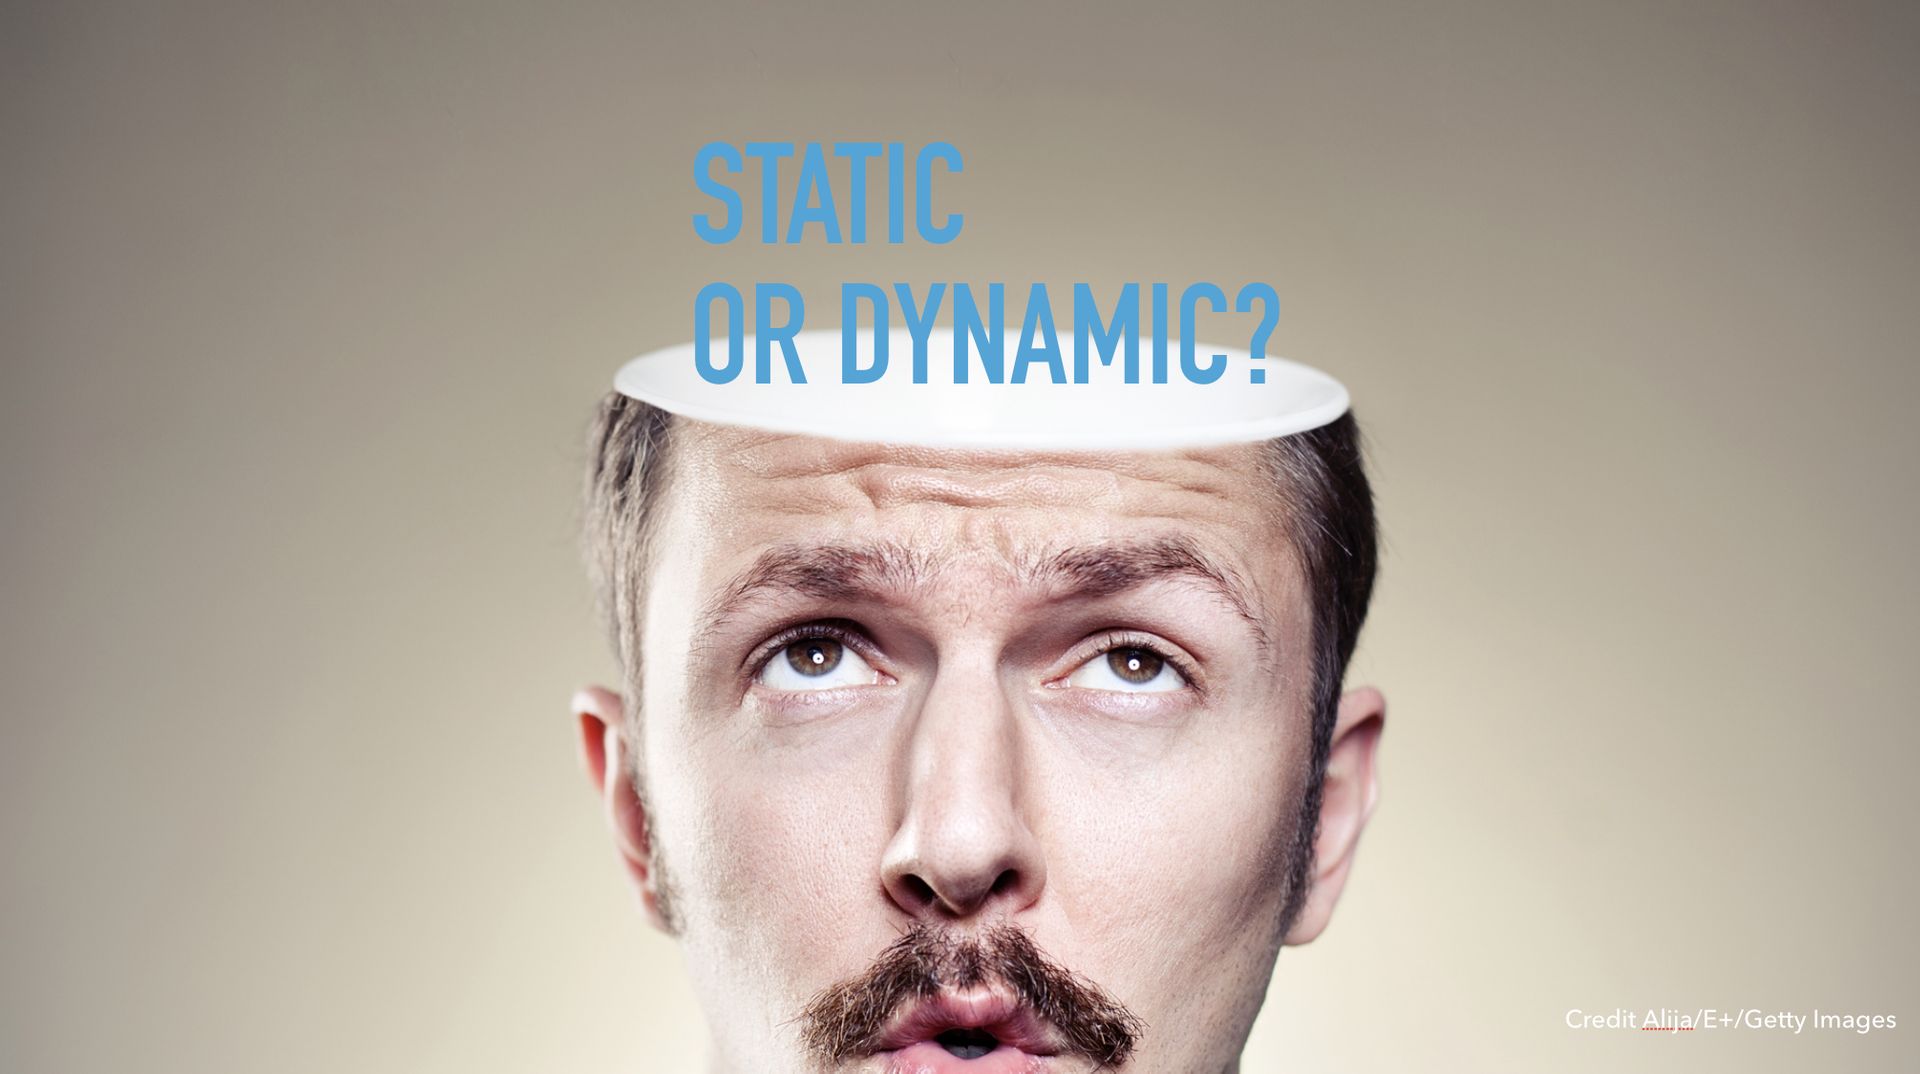 Slide text: Static or dynamic?